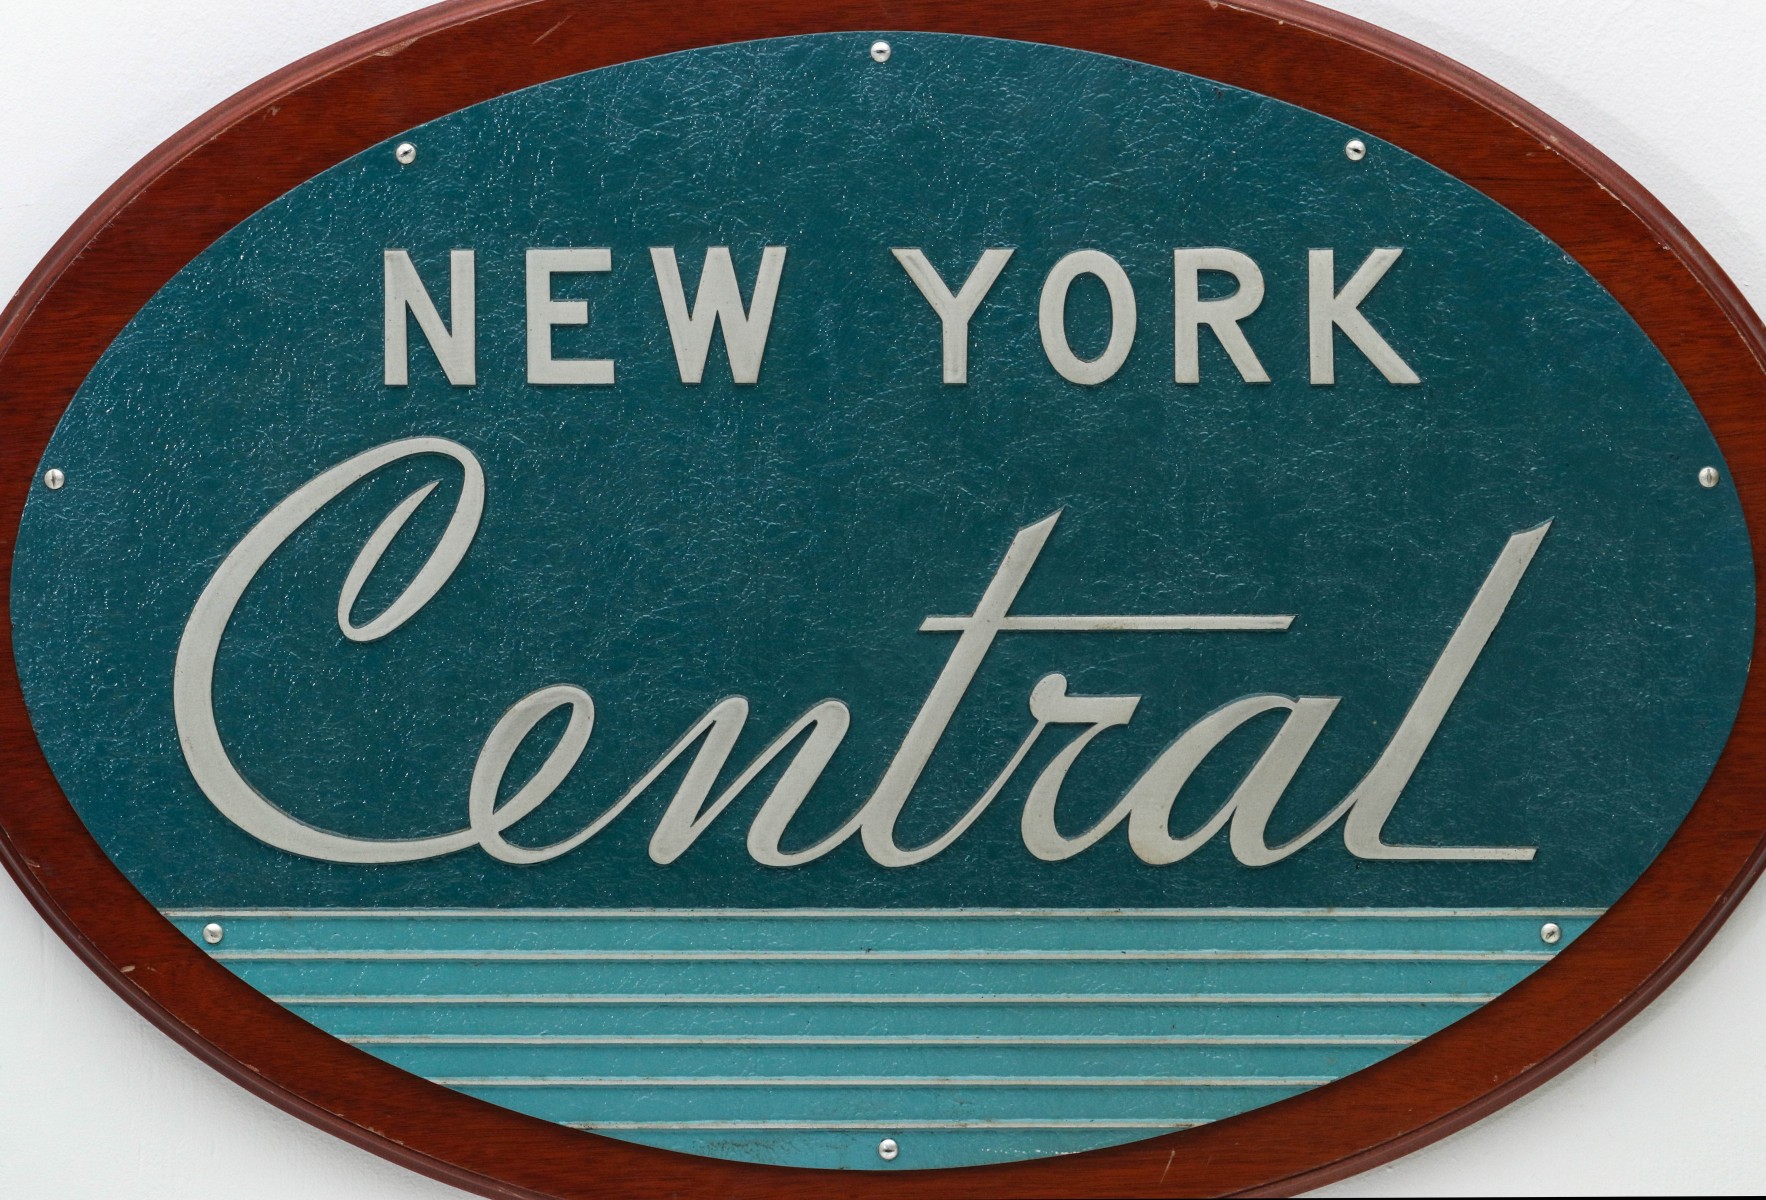 A MID 20TH CENTURY NEW YORK CENTRAL ADVERTISING PLAQUE